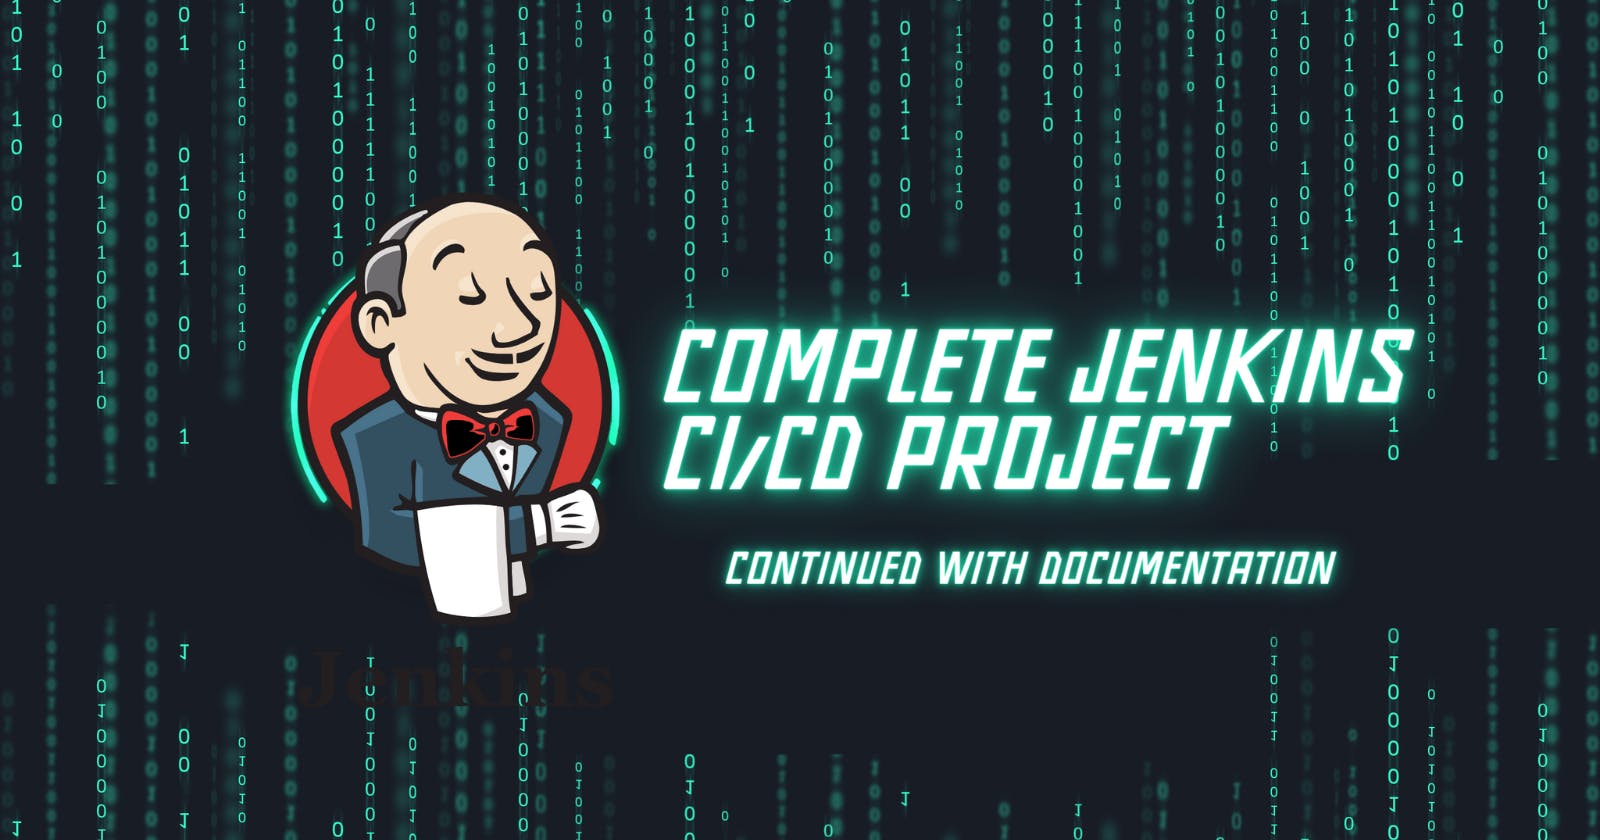 🛠Day 25 - Complete Jenkins CI/CD Project - Continued with Documentation